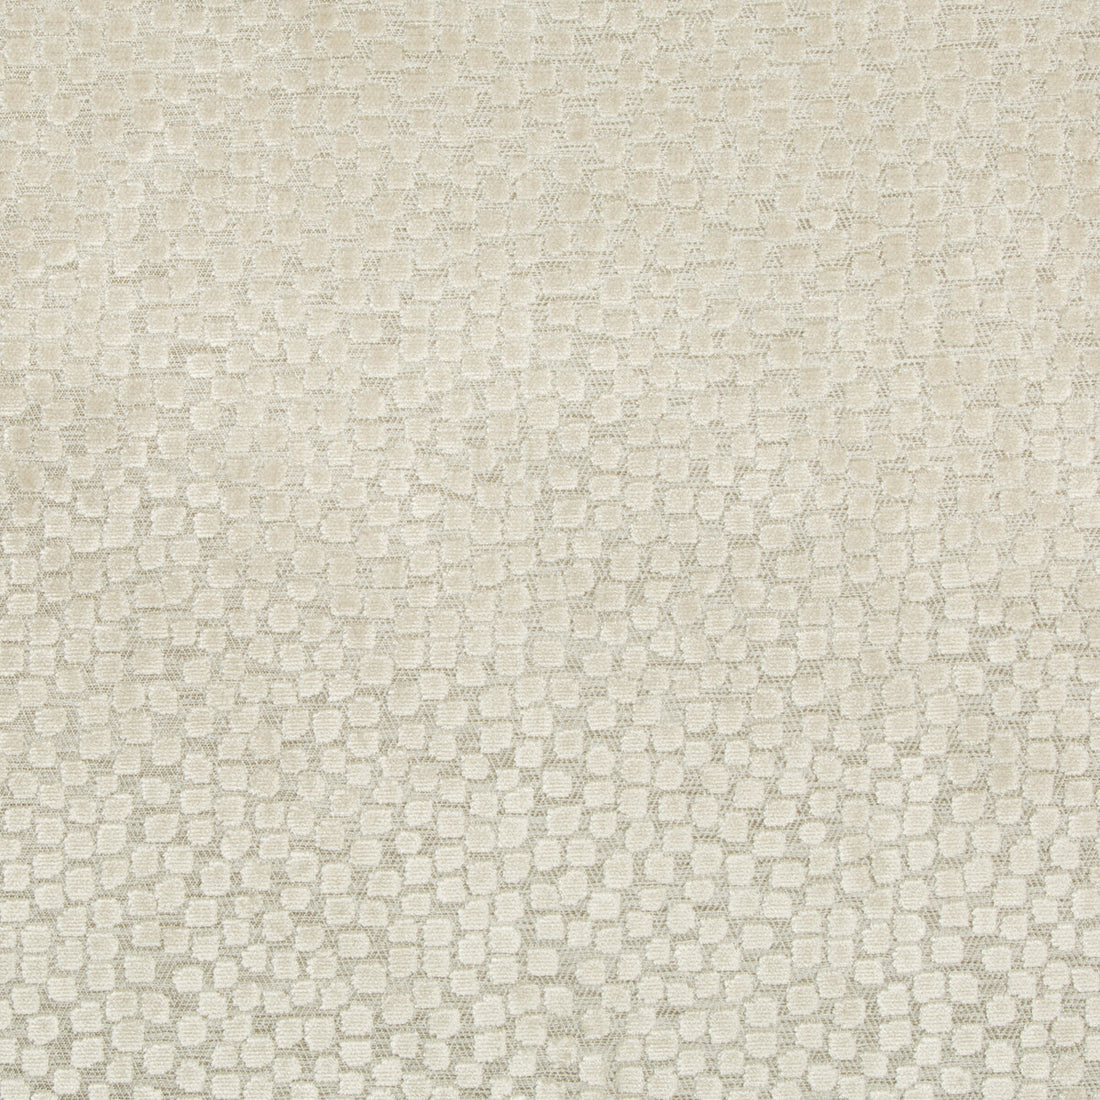 Flurries fabric in stone color - pattern 34849.16.0 - by Kravet Design in the Thom Filicia Altitude collection